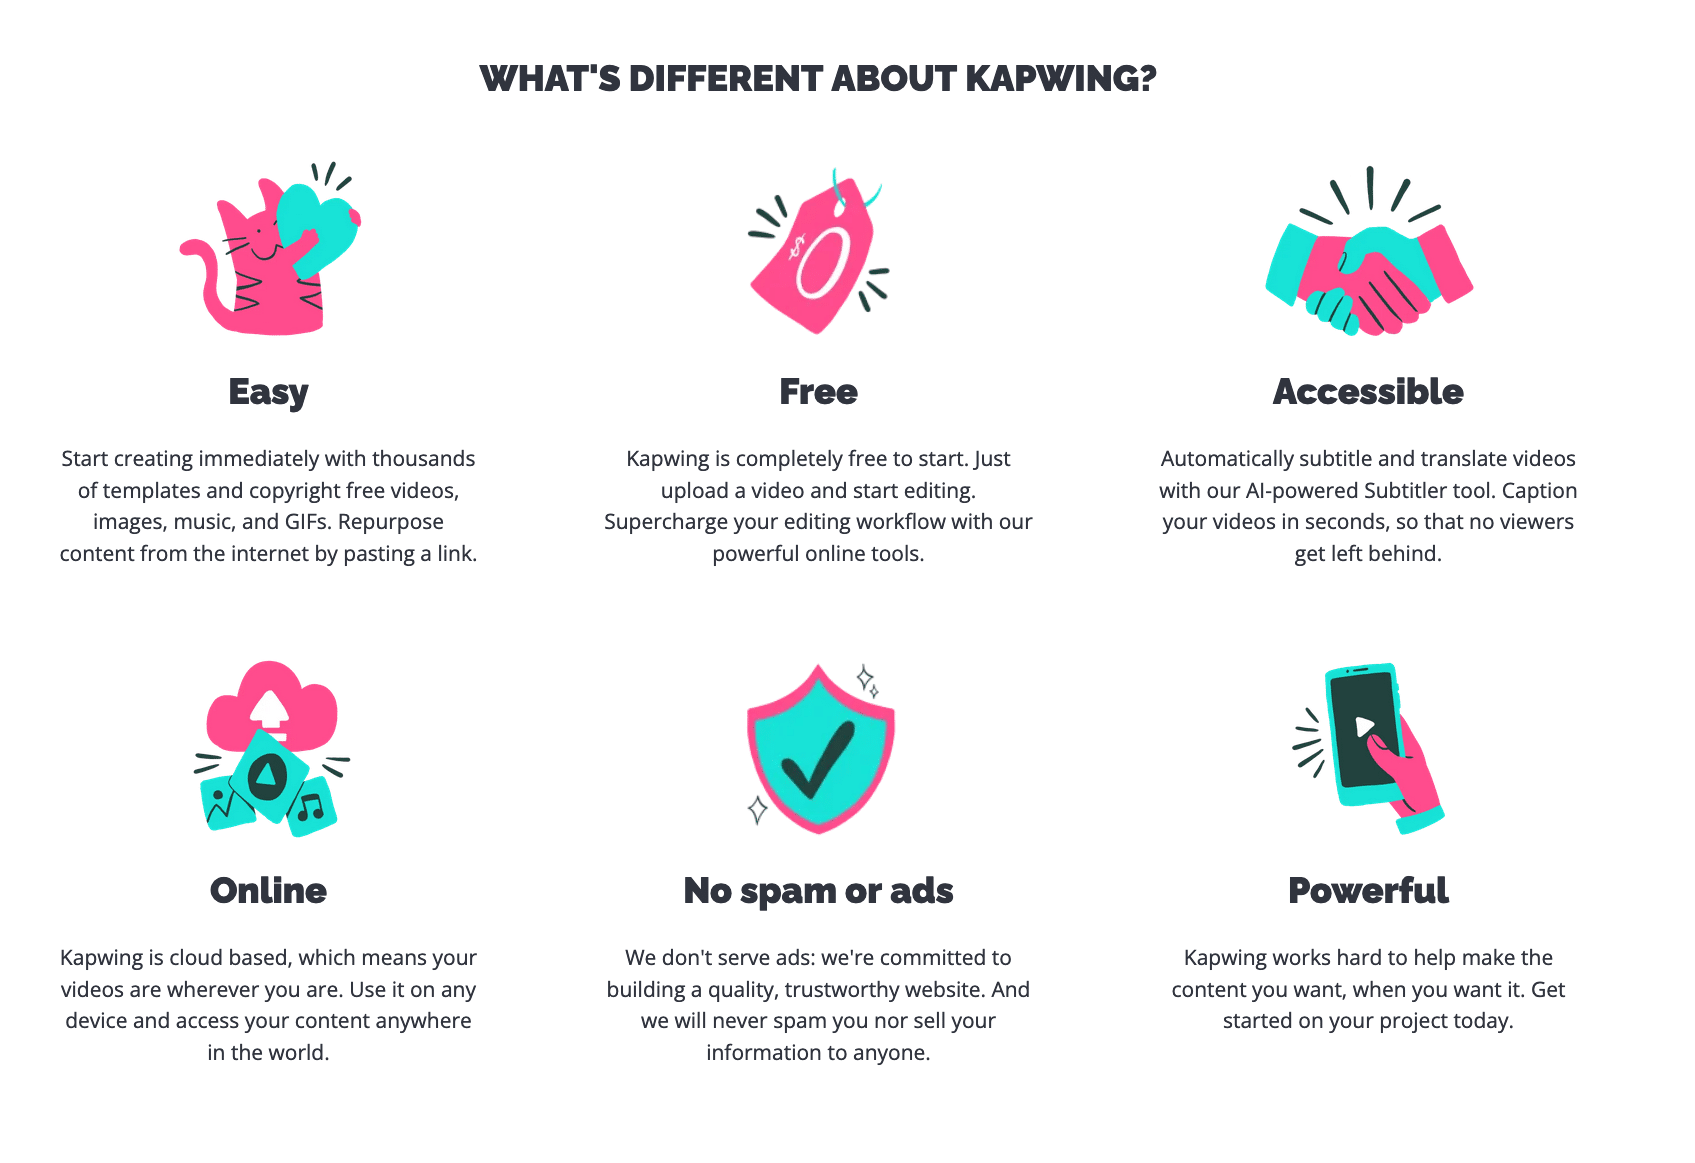 What's different about Kapwing